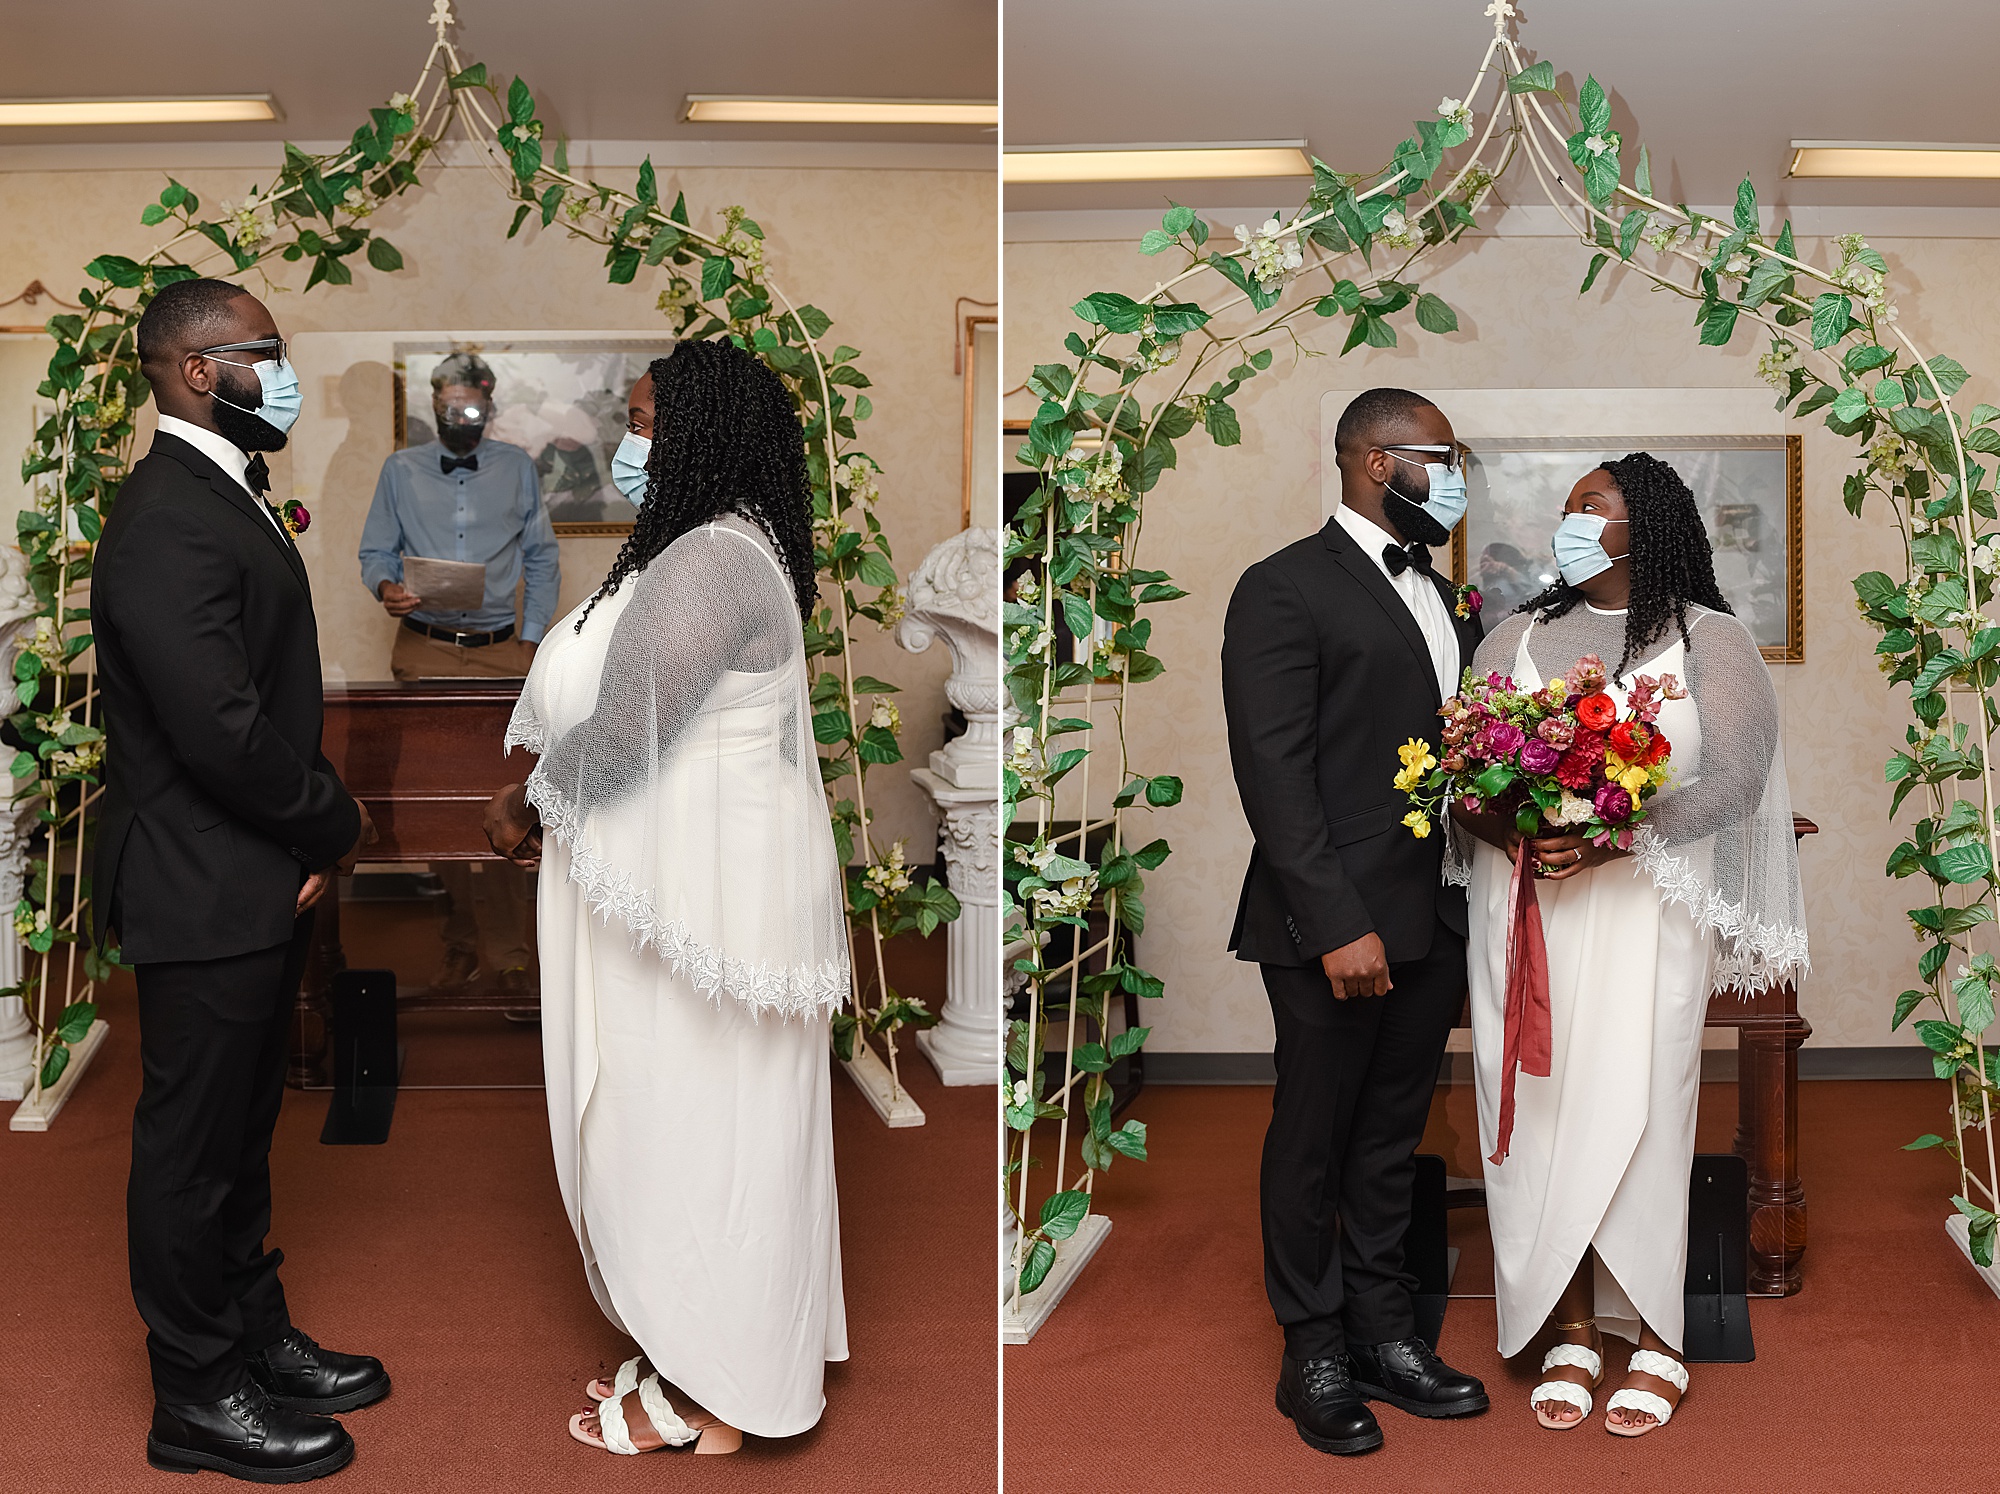 couple exchanges vows at courthouse in Baltimore MD